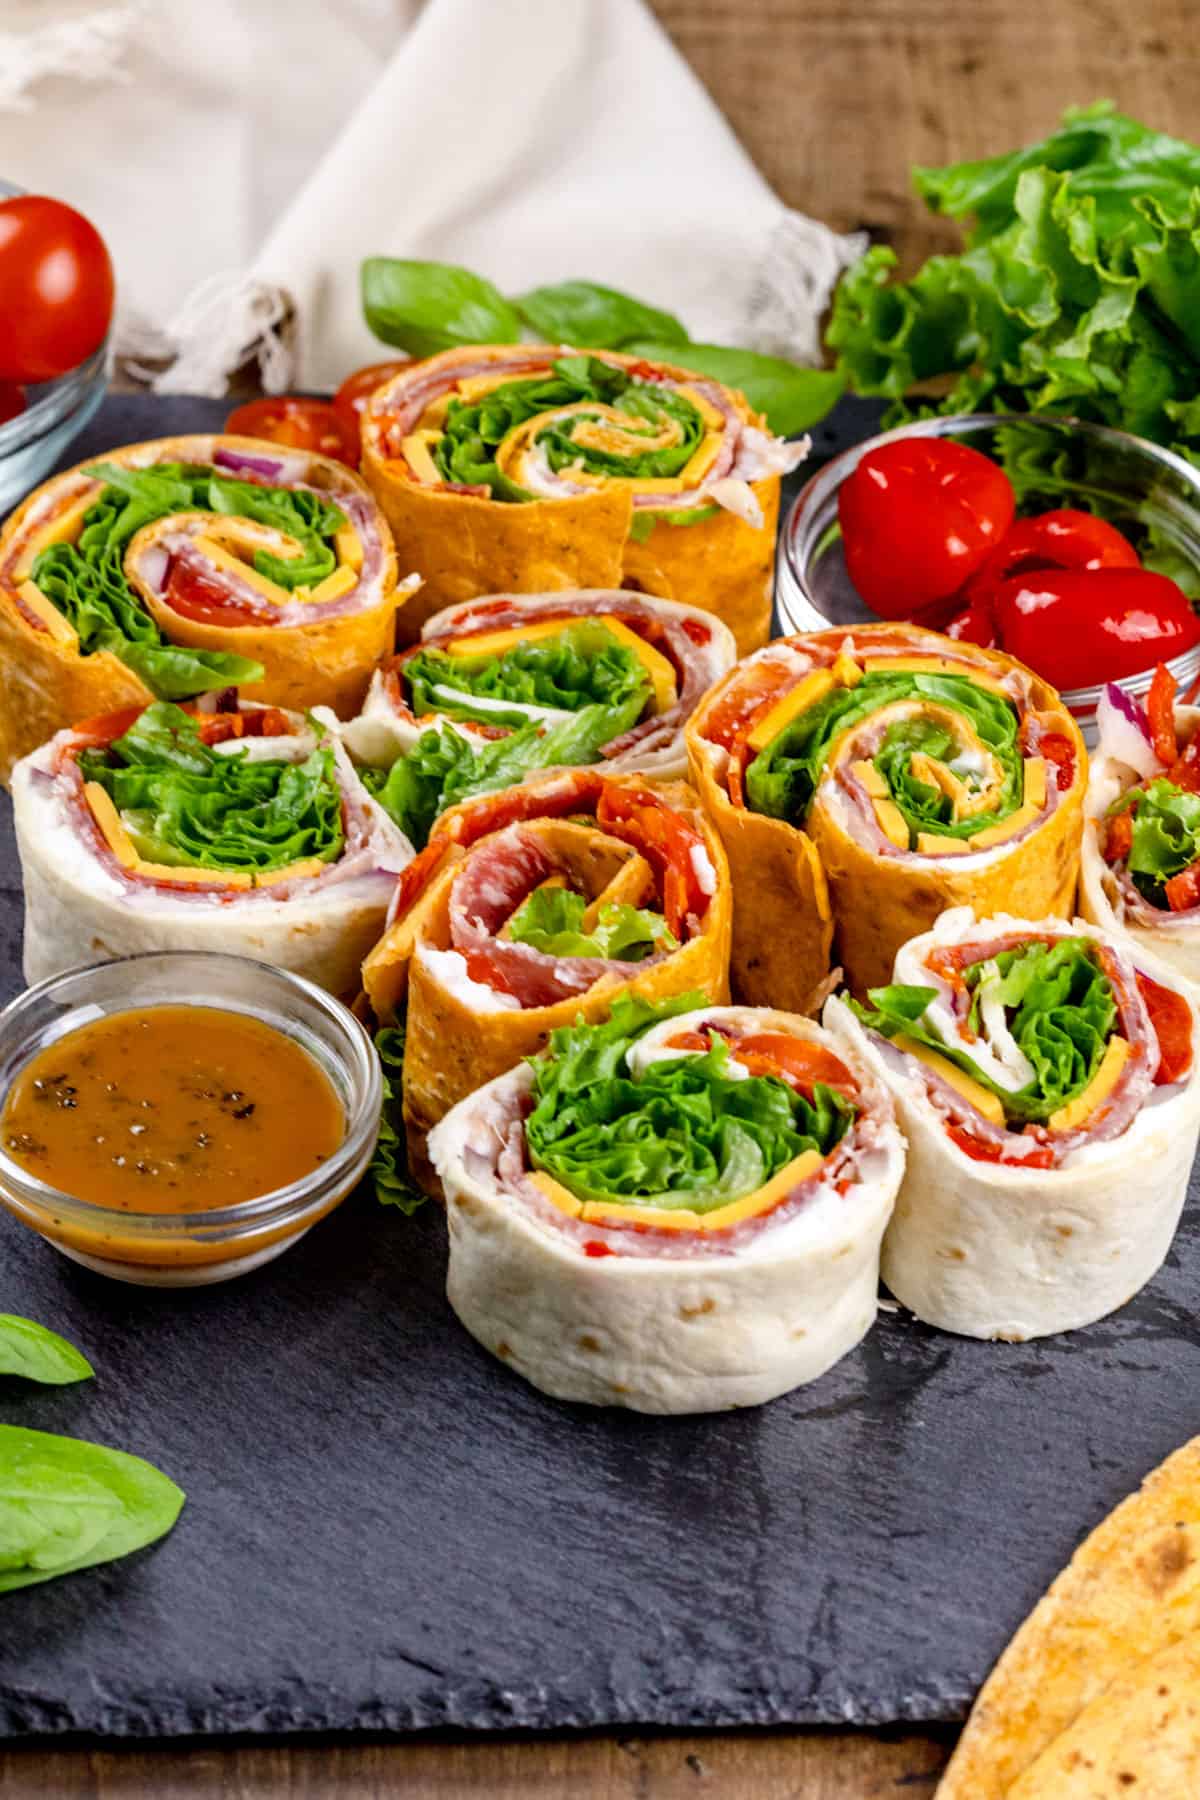 Many pinwheels on a black slate serving tray with small bowls filled with dip and more peppers. Fresh lettuce and other tomatoes are blurred in the background.